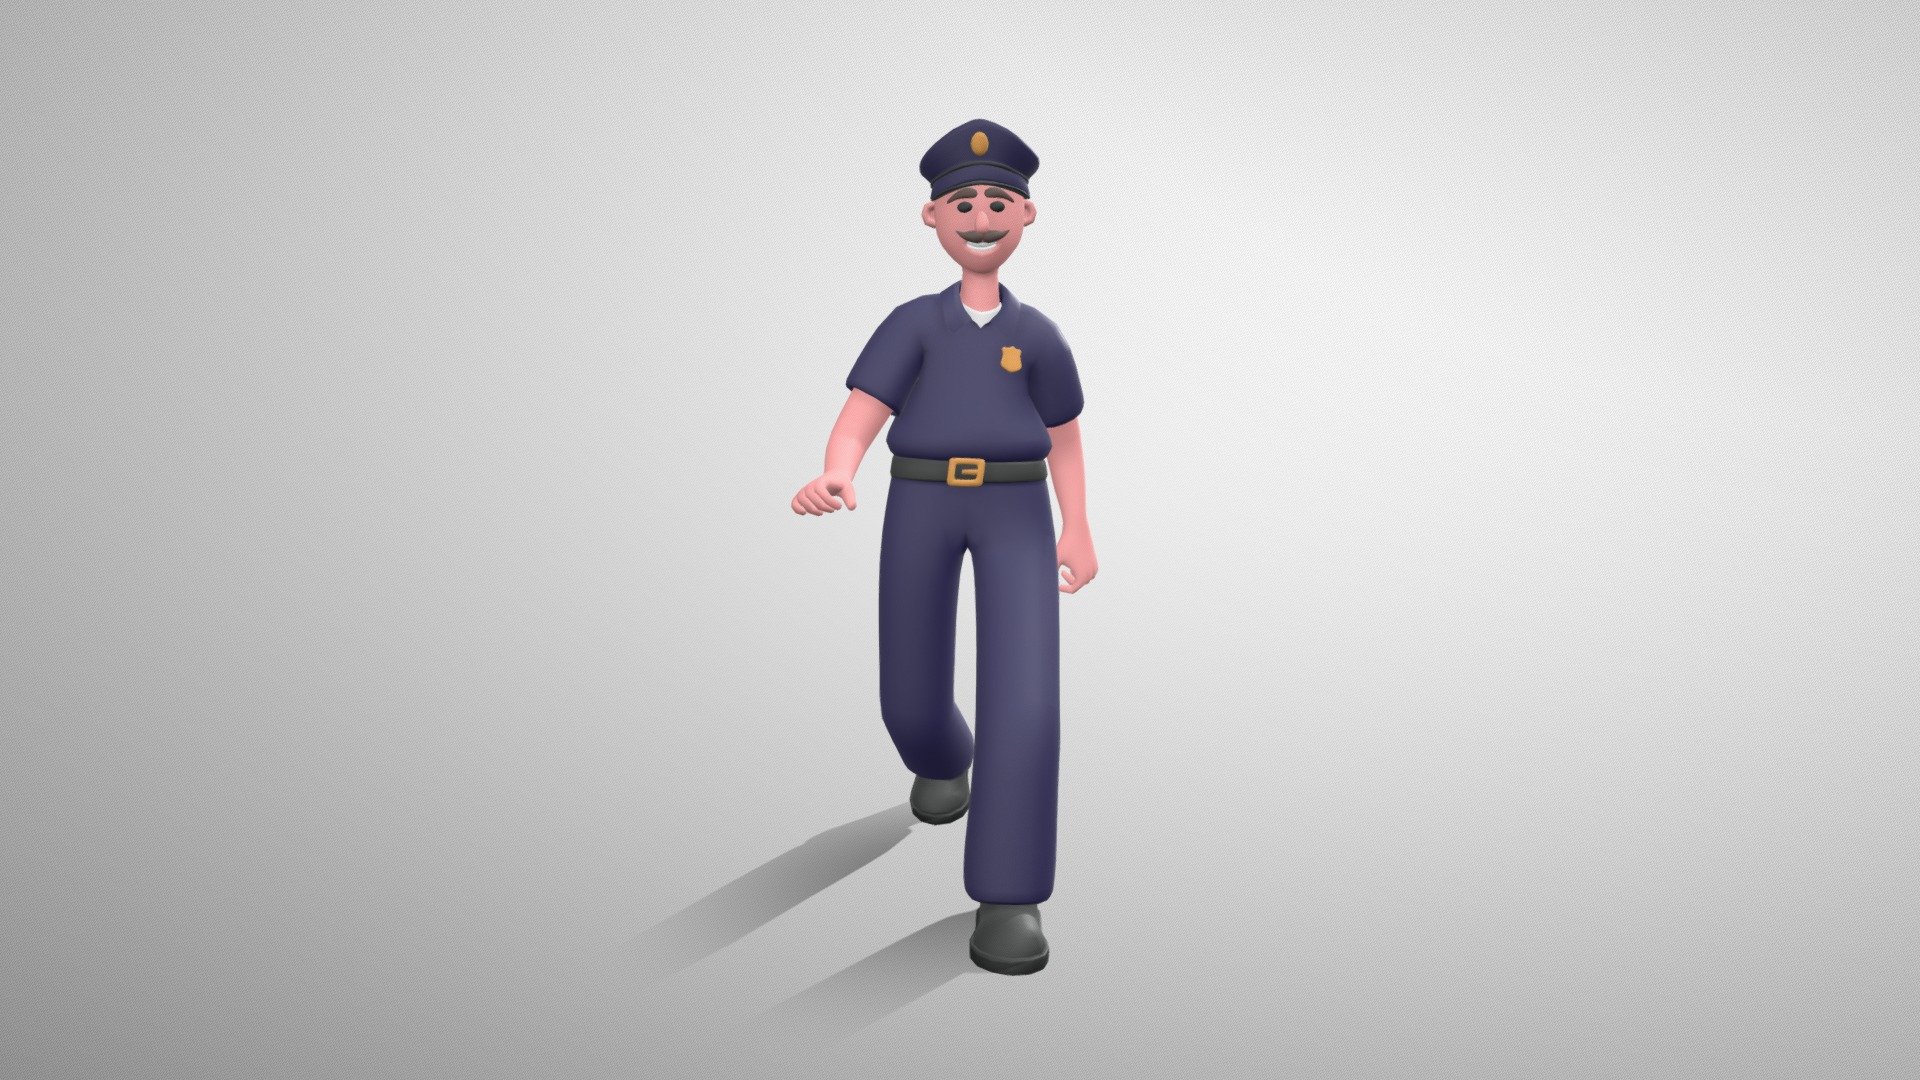 Stylized Man Police Officer is the part of the big characters bundle. These stylized 3D characters might be useful for motion graphics design, cartoon production, game development, illustrations and many other industries.

The 3D model is rigged and ready to use with Mixamo. You can apply any Mixamo animation in one click . We also added 12 widely used animations.

The character model is well optimized and subdivision ready. You can choose any smoothing option you want, according to your project.

The model has only a single texture. It is useful for mobile game development and it's easy to change colors of clothes, skin etc.

If you have any questions or suggestions on improving our product, feel free to send a message to mail@dreamlab.net.ua - Stylized Policeman - Mixamo Rigged Character - Buy Royalty Free 3D model by Dream Lab (@dreamlabanim) 3d model